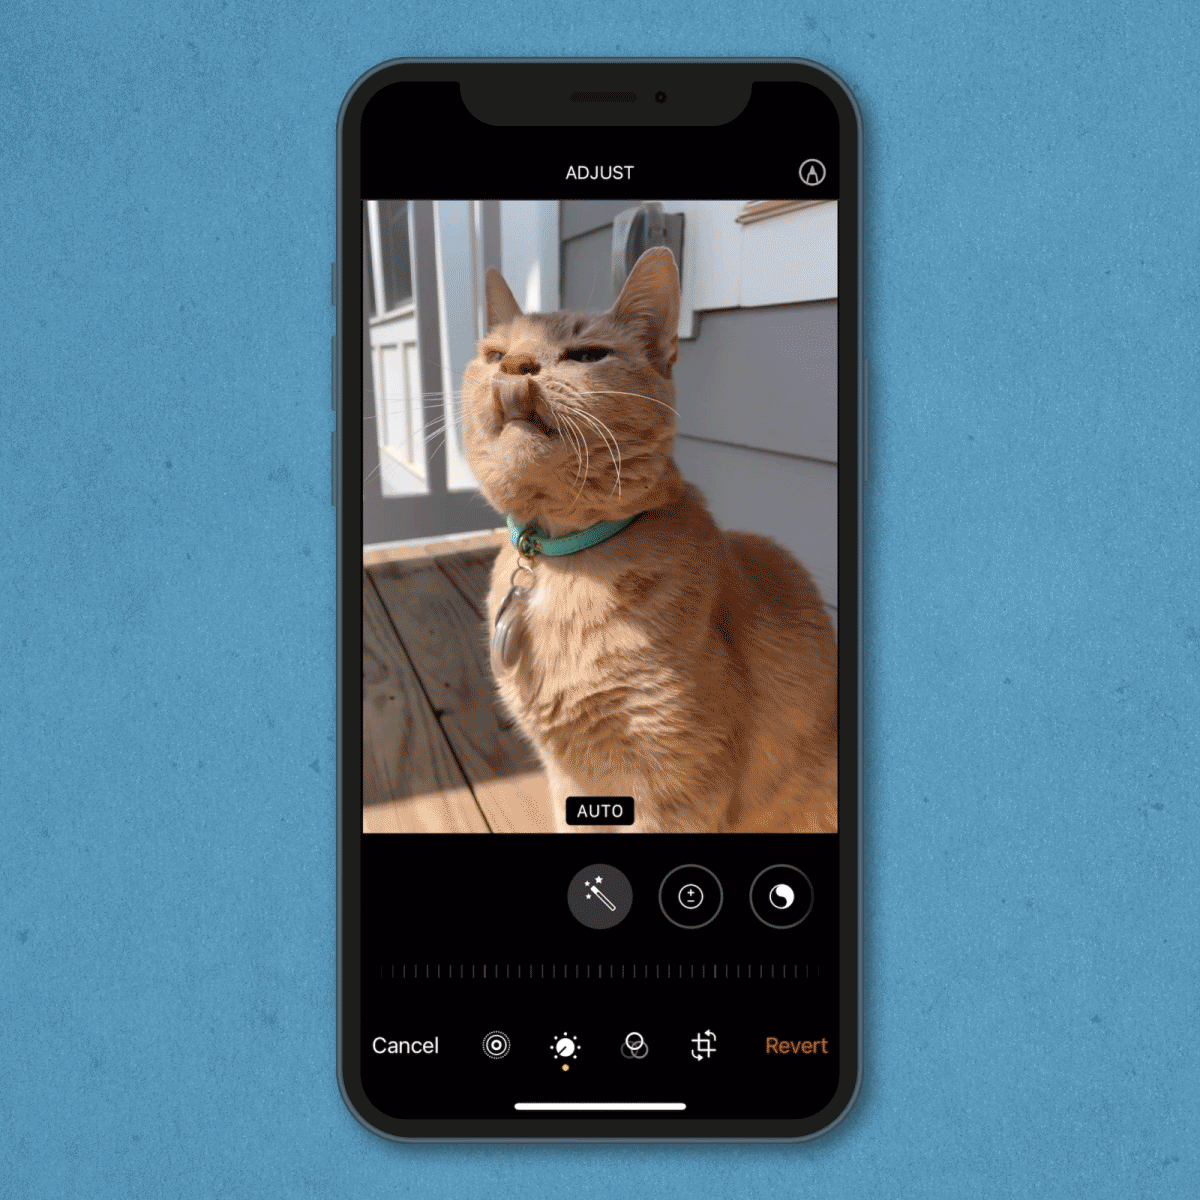 gif showing how to apply a filter to a photo on an iPhone